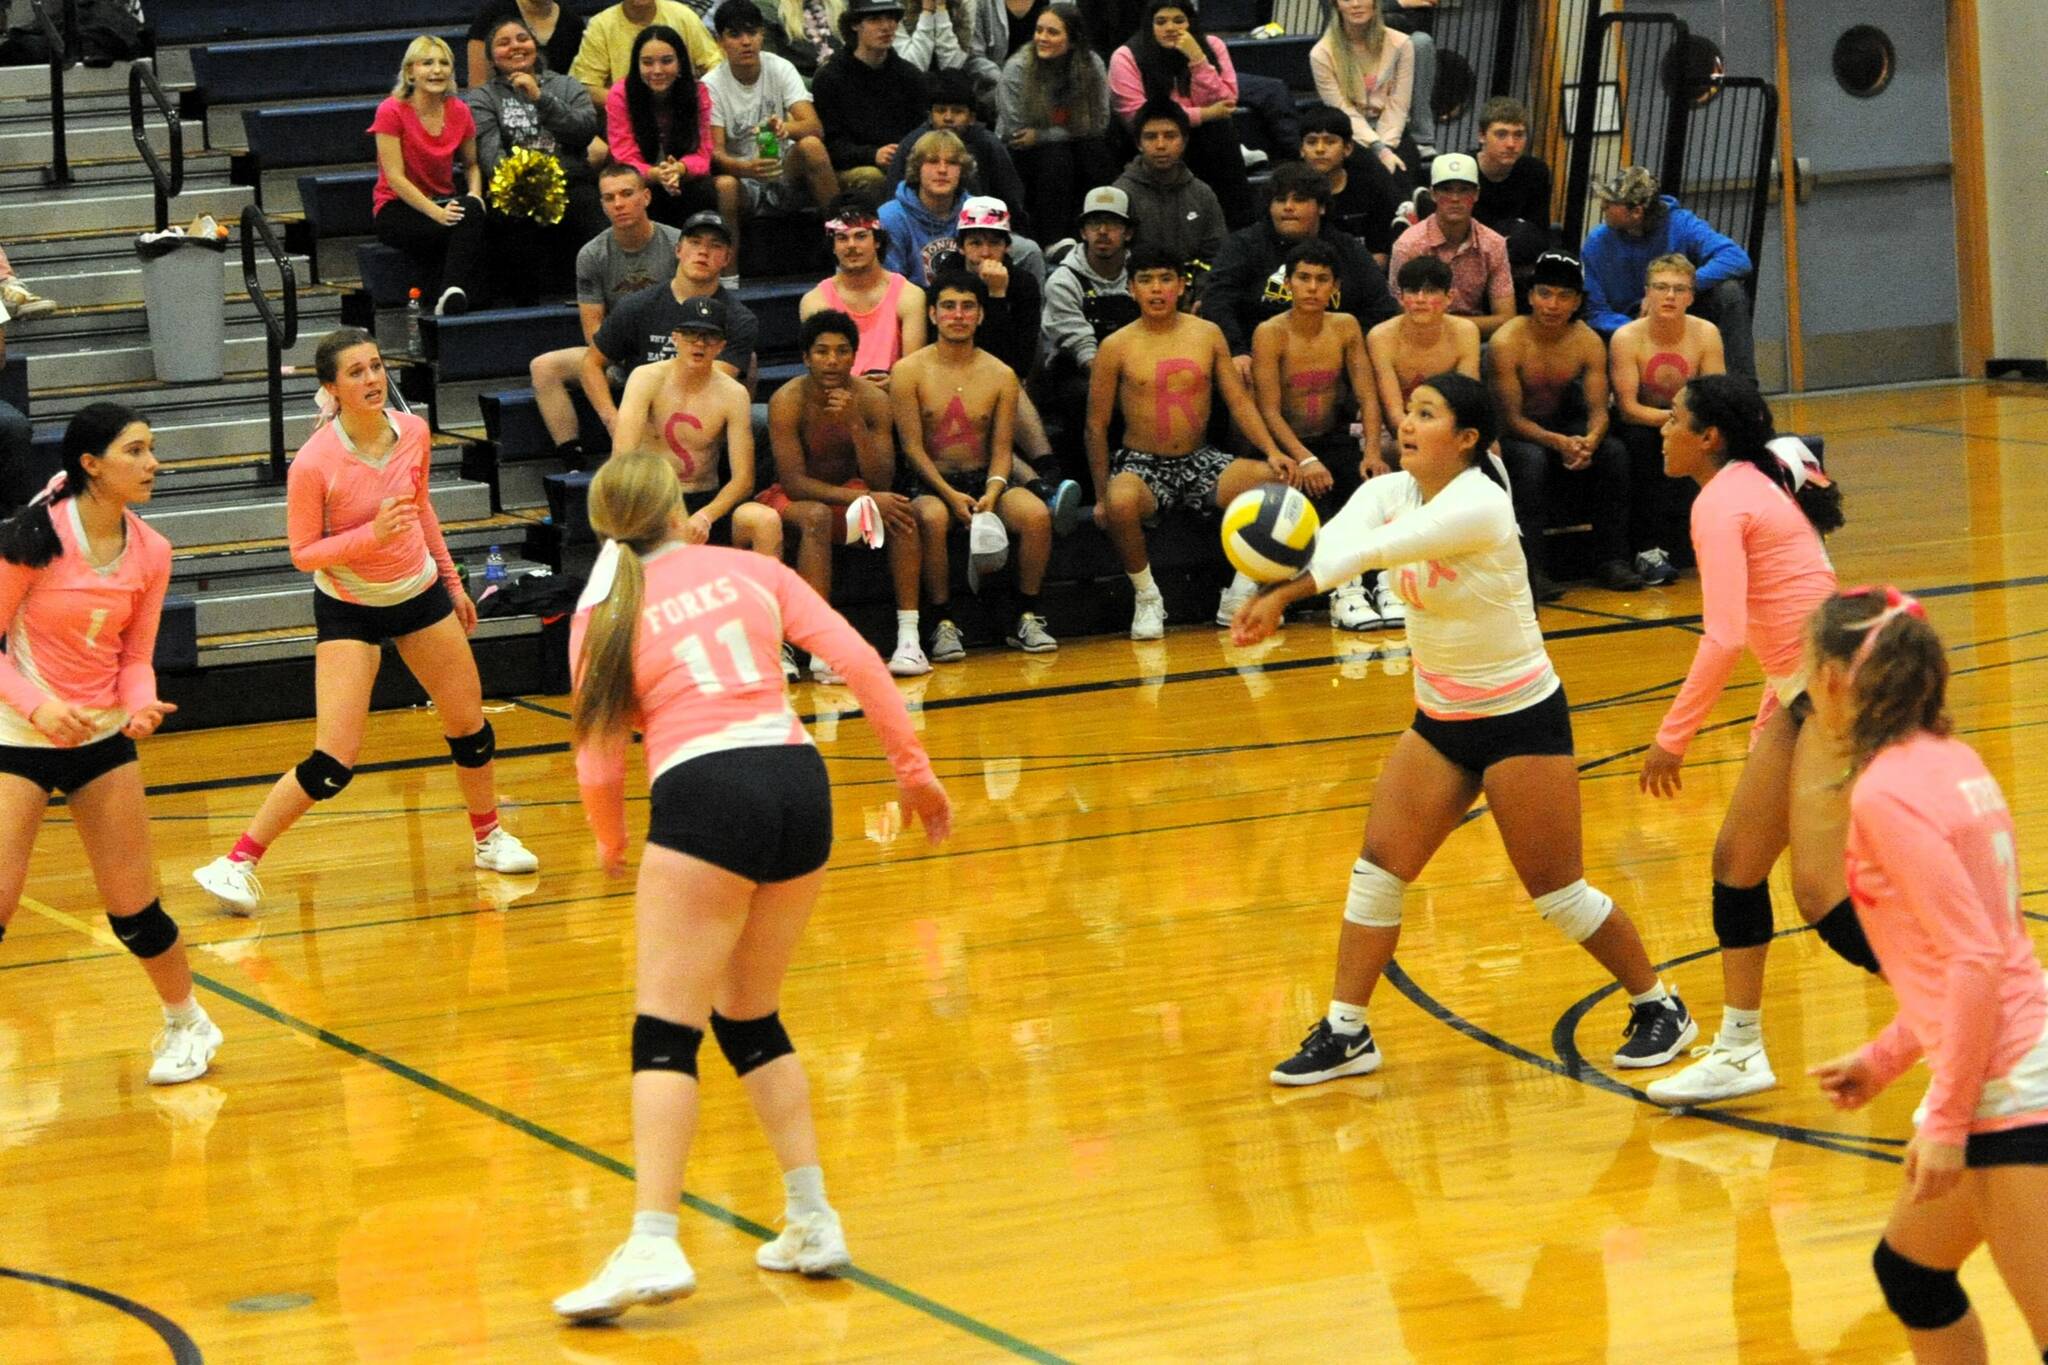 Forks’ Elizabeth Soto hits against the Ravens Oct. 17 in the Spartan Gym where Raymond-South Bend took three close sets from Forks. Also pictured are, from left, Erika Williams, Chloe Gaydeski, Keana Rowley, Eladia Hernandez-Stansbury and Karee Neel. Photo by Lonnie Archibald